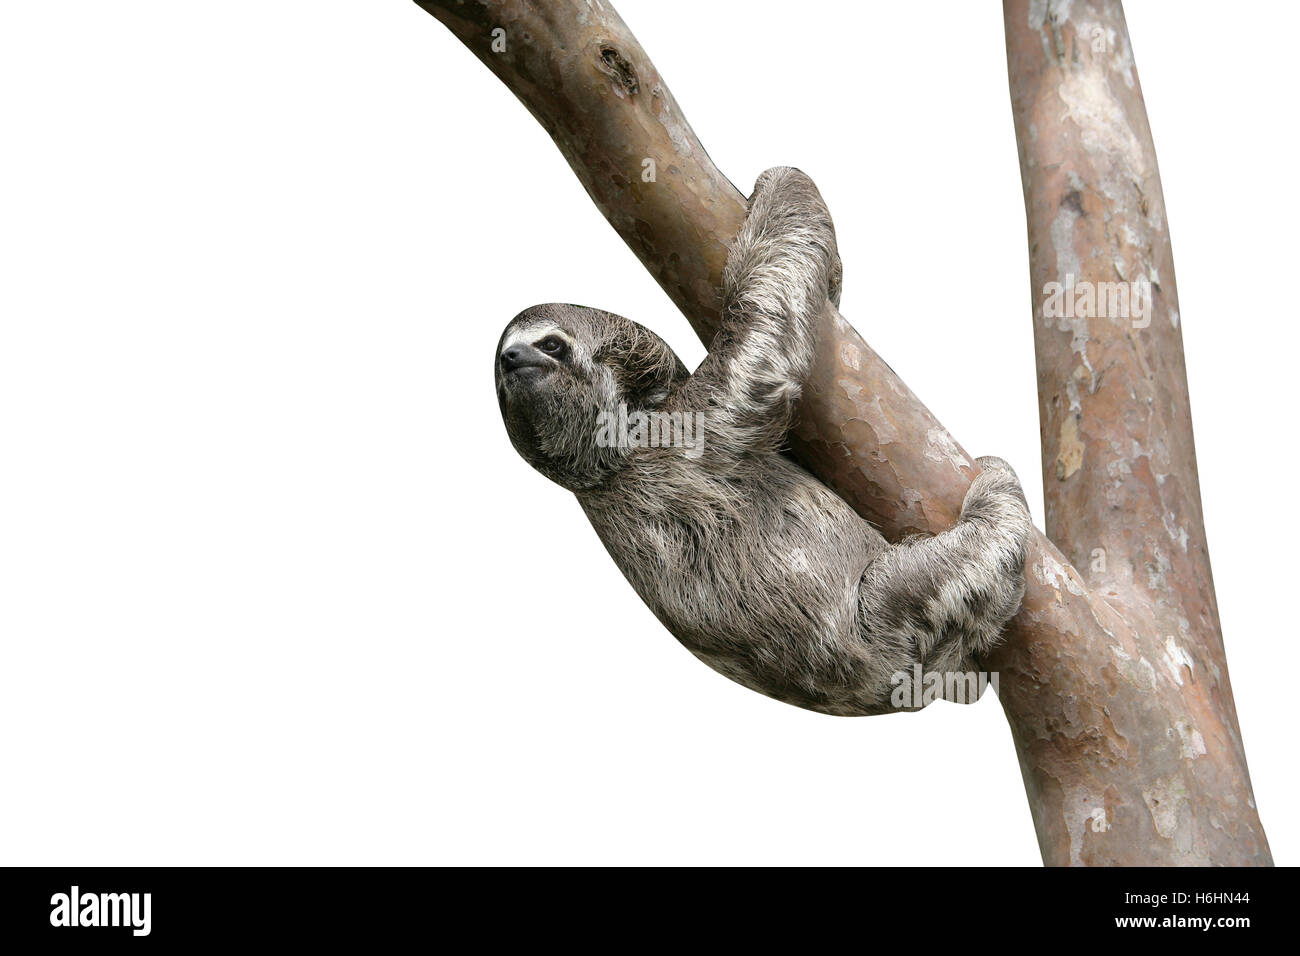 Brown-throated three-toed sloth, Bradypus variegatus, Youngster, Brazil Stock Photo